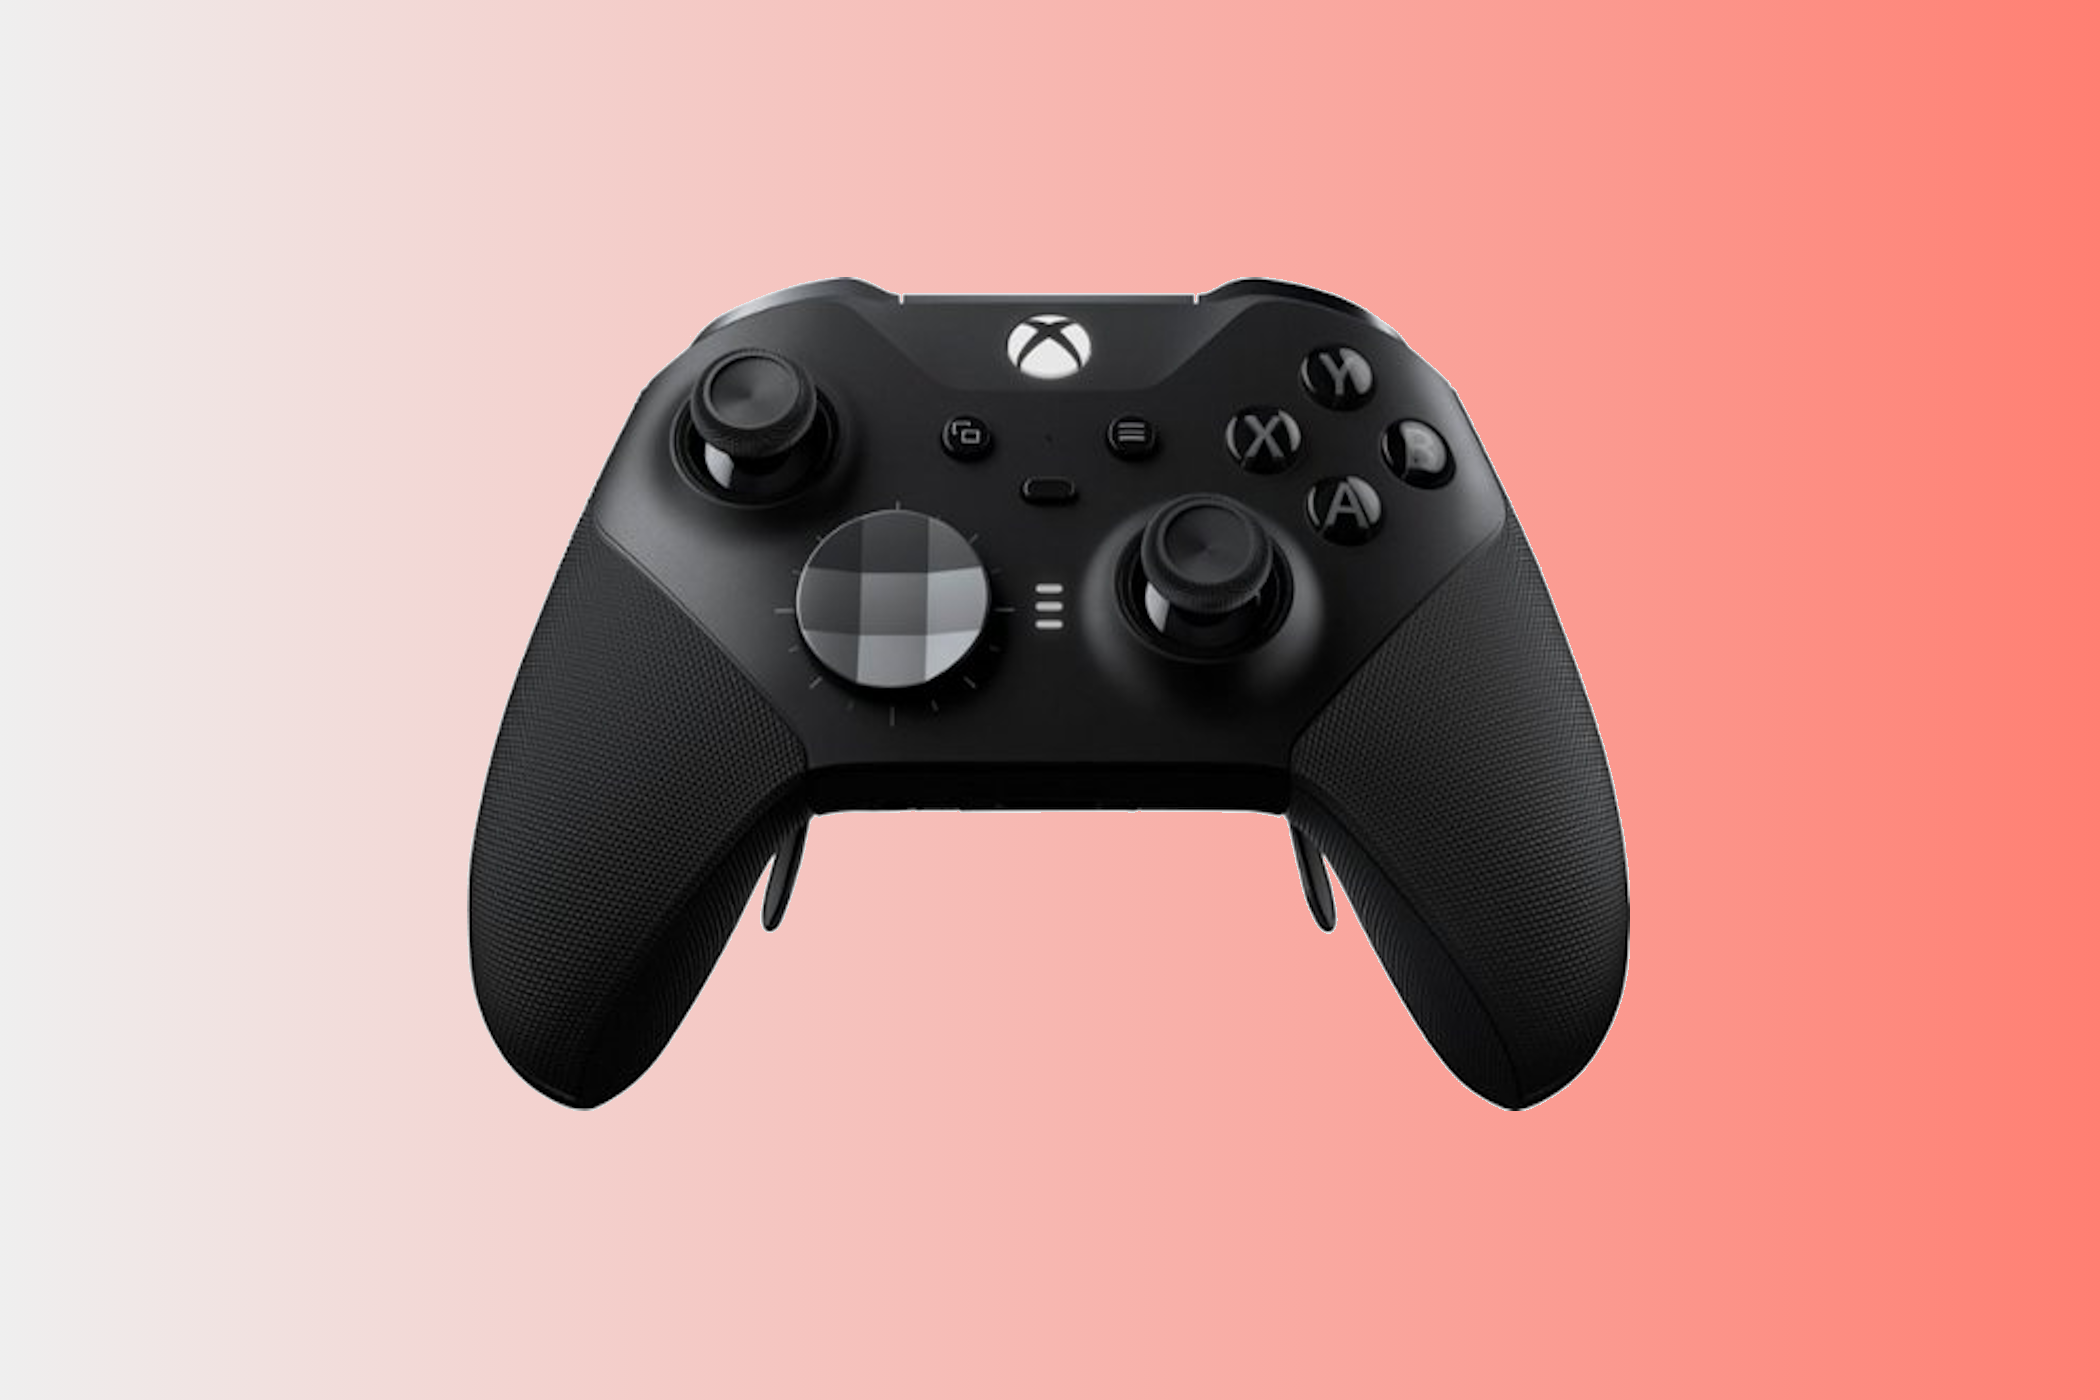 Microsoft Elite Series 2 controller on a gradient background